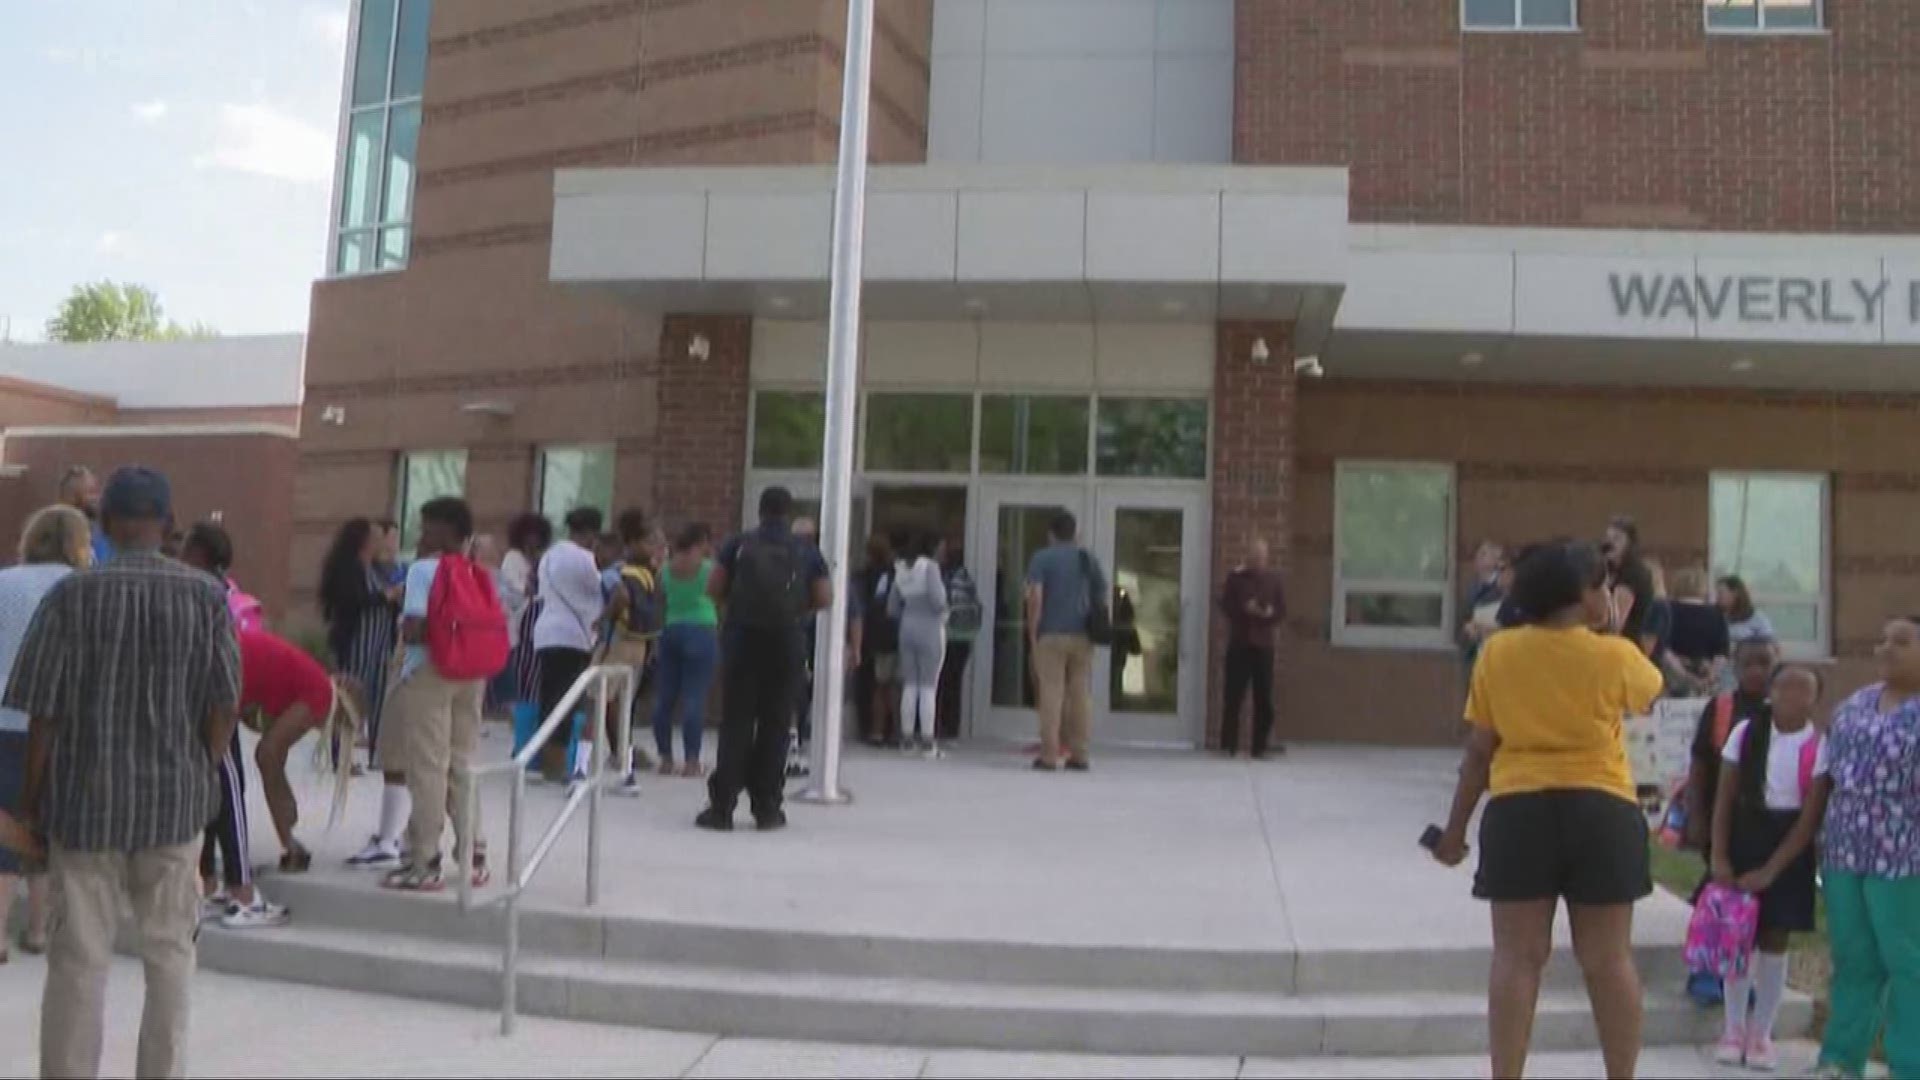 Cleveland schools are back in session today, welcoming students to some new buildings.
This is also the first full school year of a program that will cover college costs for graduates over the next 25 years.